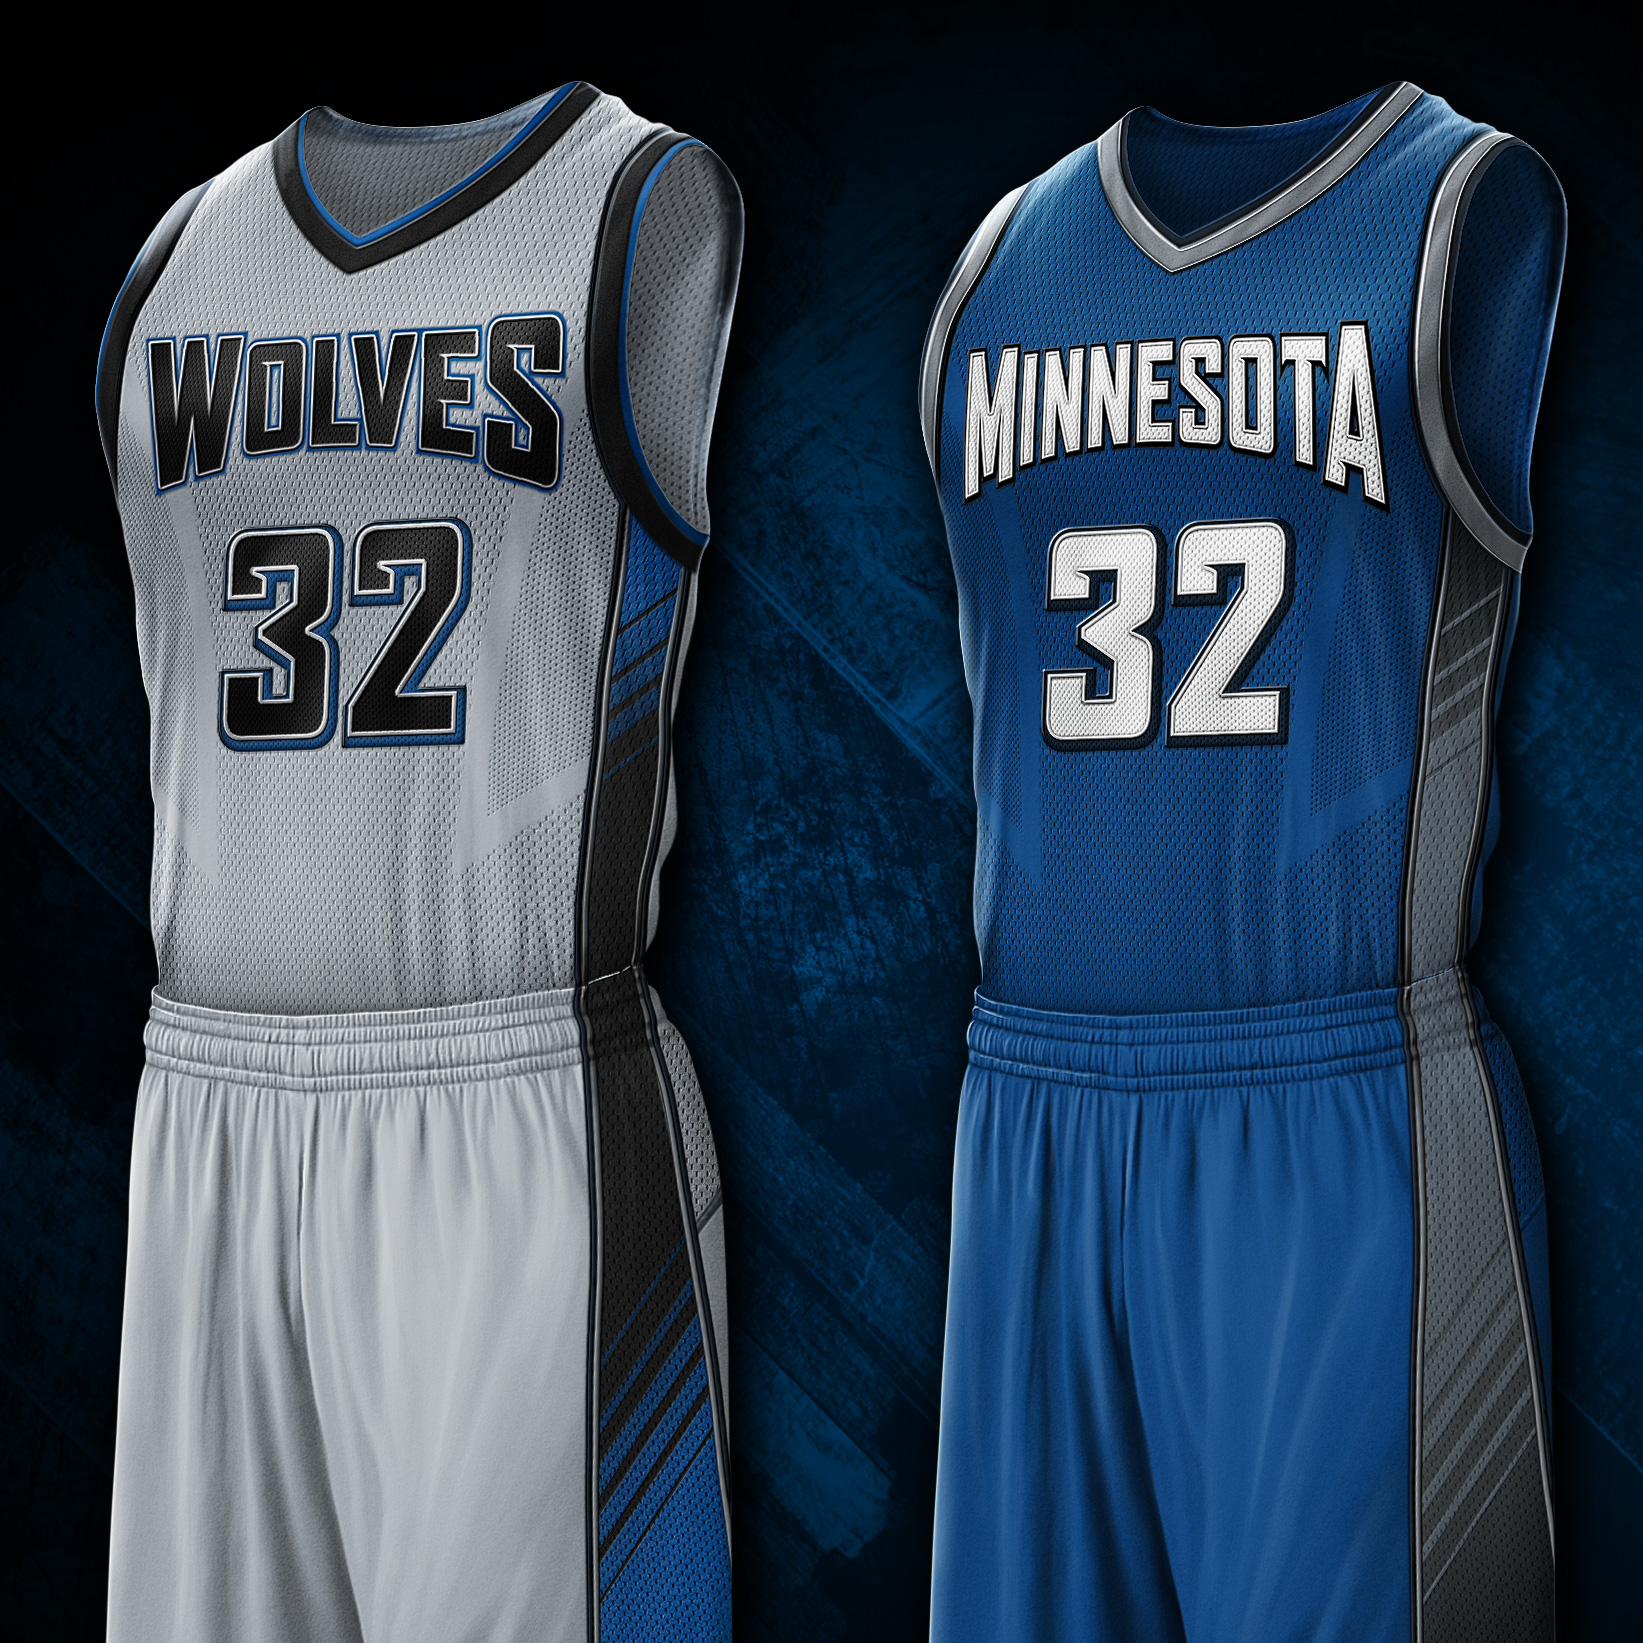 Timberwolves jersey concepts for the 'Rebranding the TWolves' contest on ESPN.com.